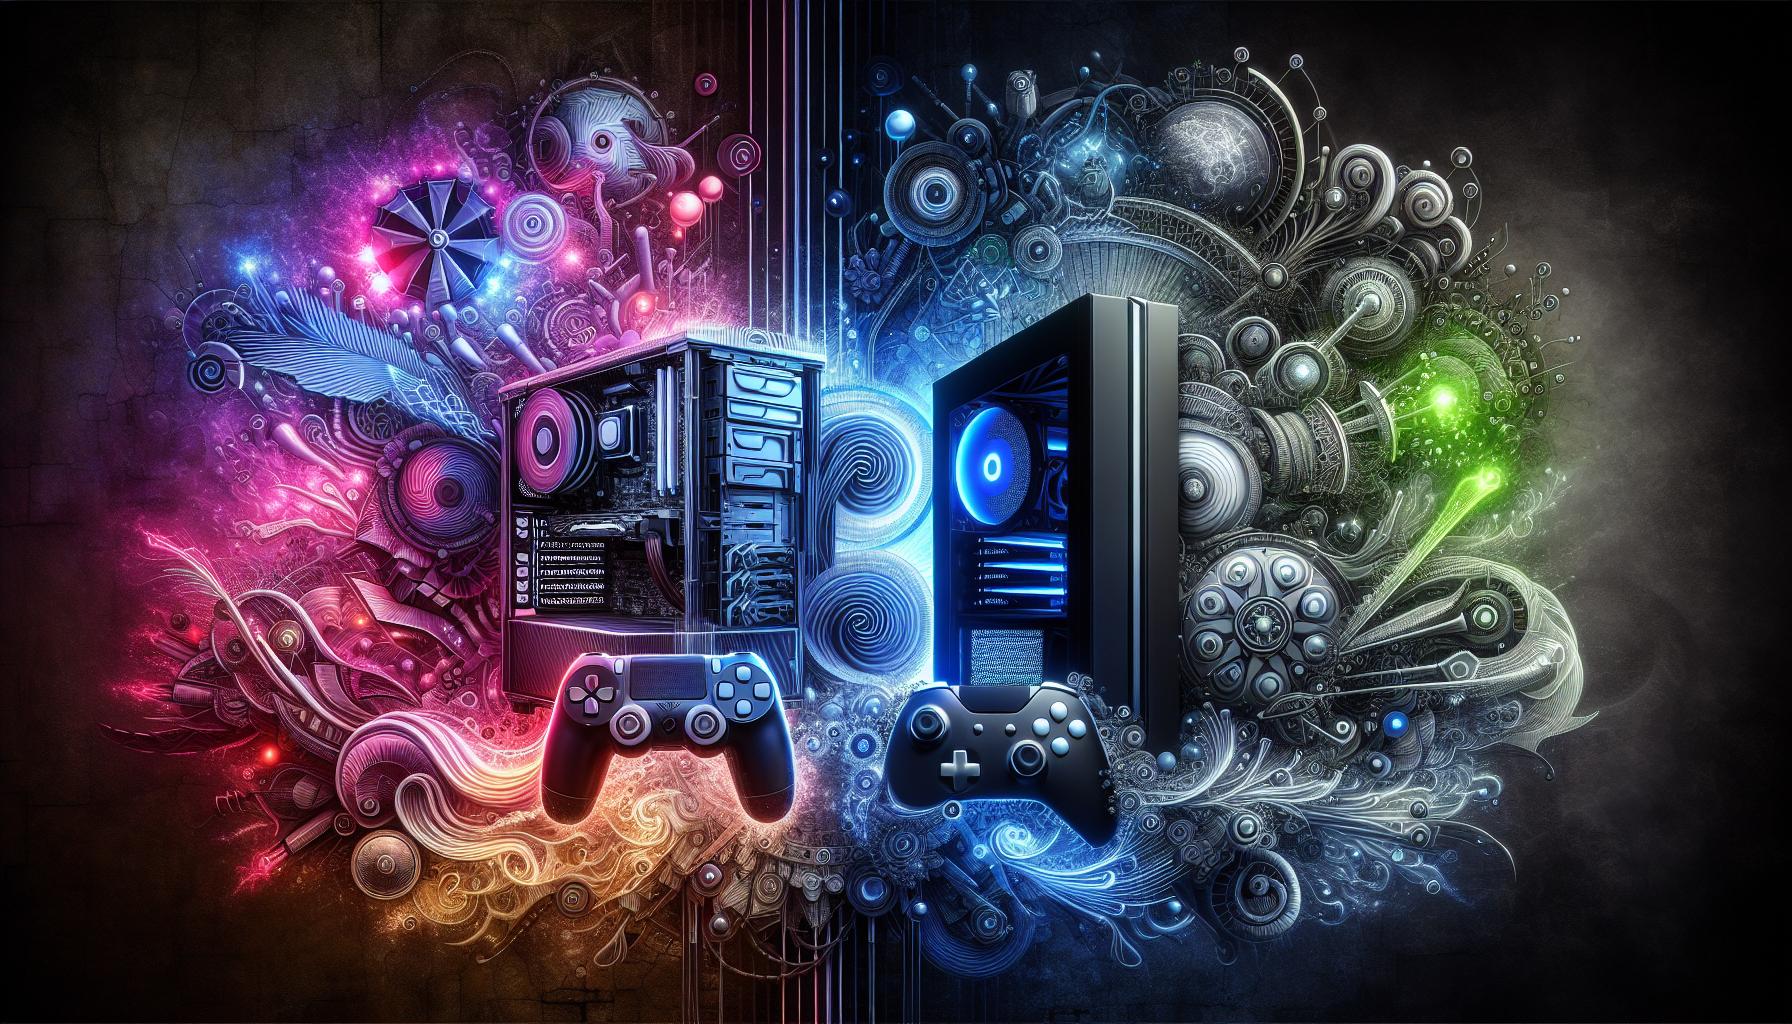 PC vs. Console Gaming: Which Should You Choose?